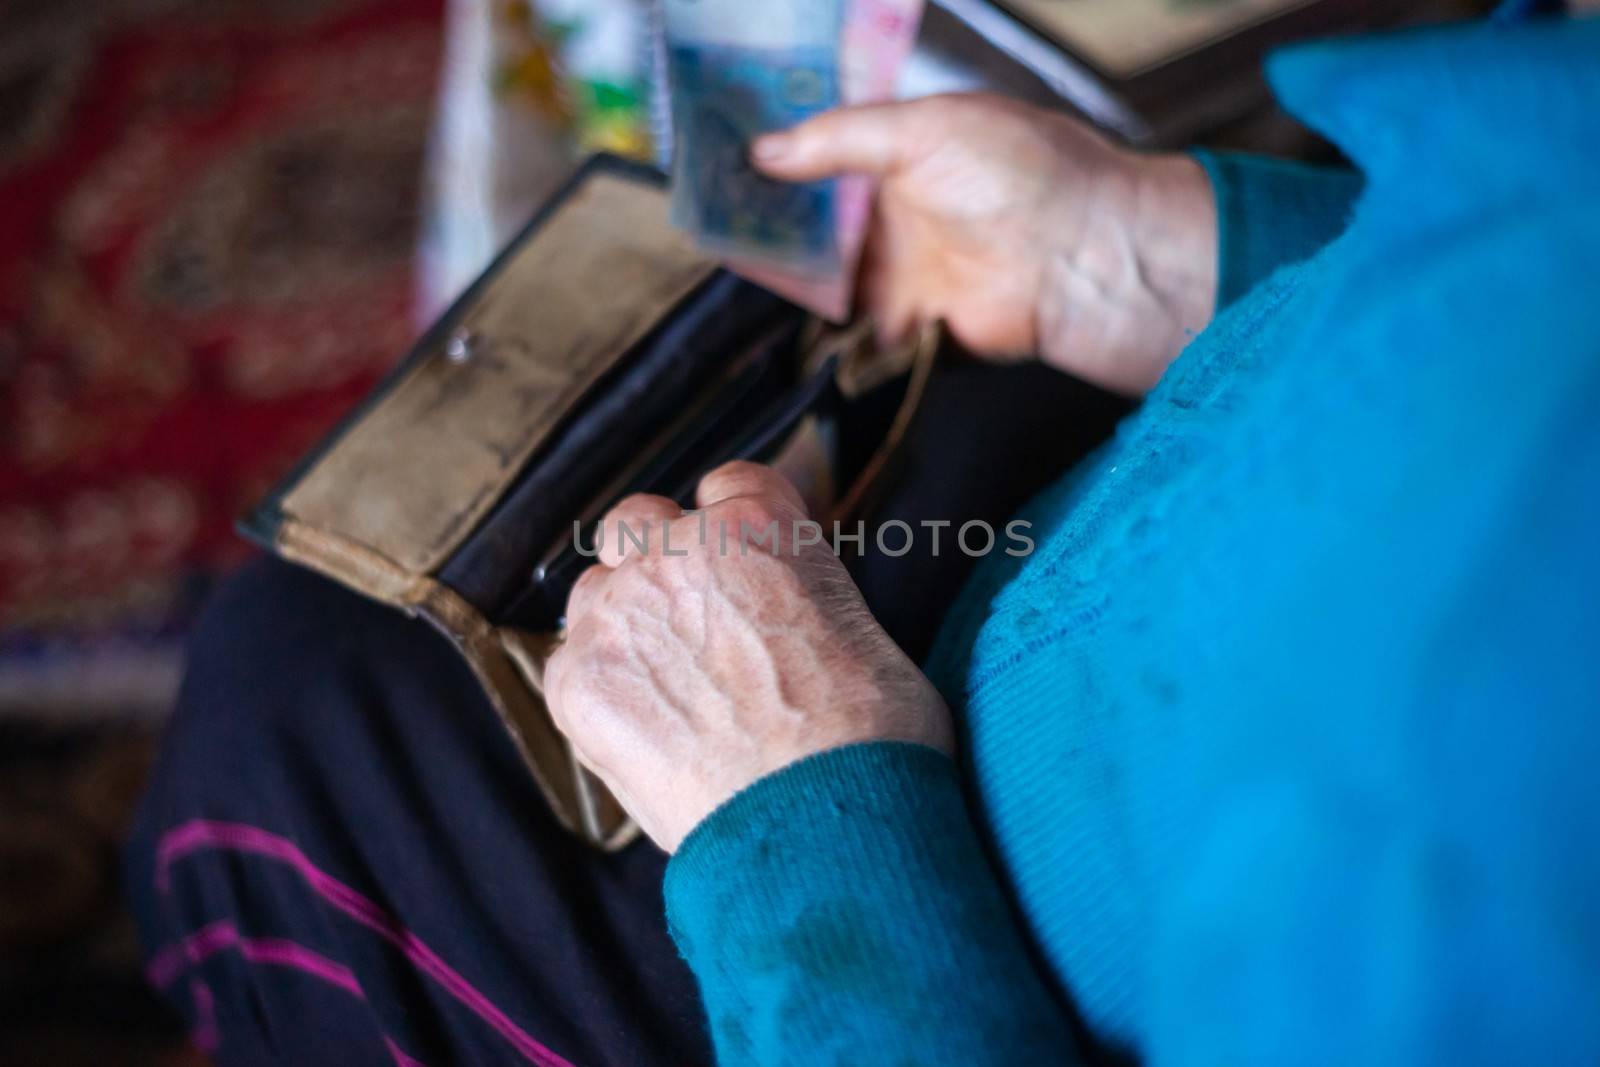 Old poor gray hair woman putting paper Ukrainian money in her vintage leather wallet by her hands. Woman is sad. Poor life in village. Old age not good. Low-light photo.